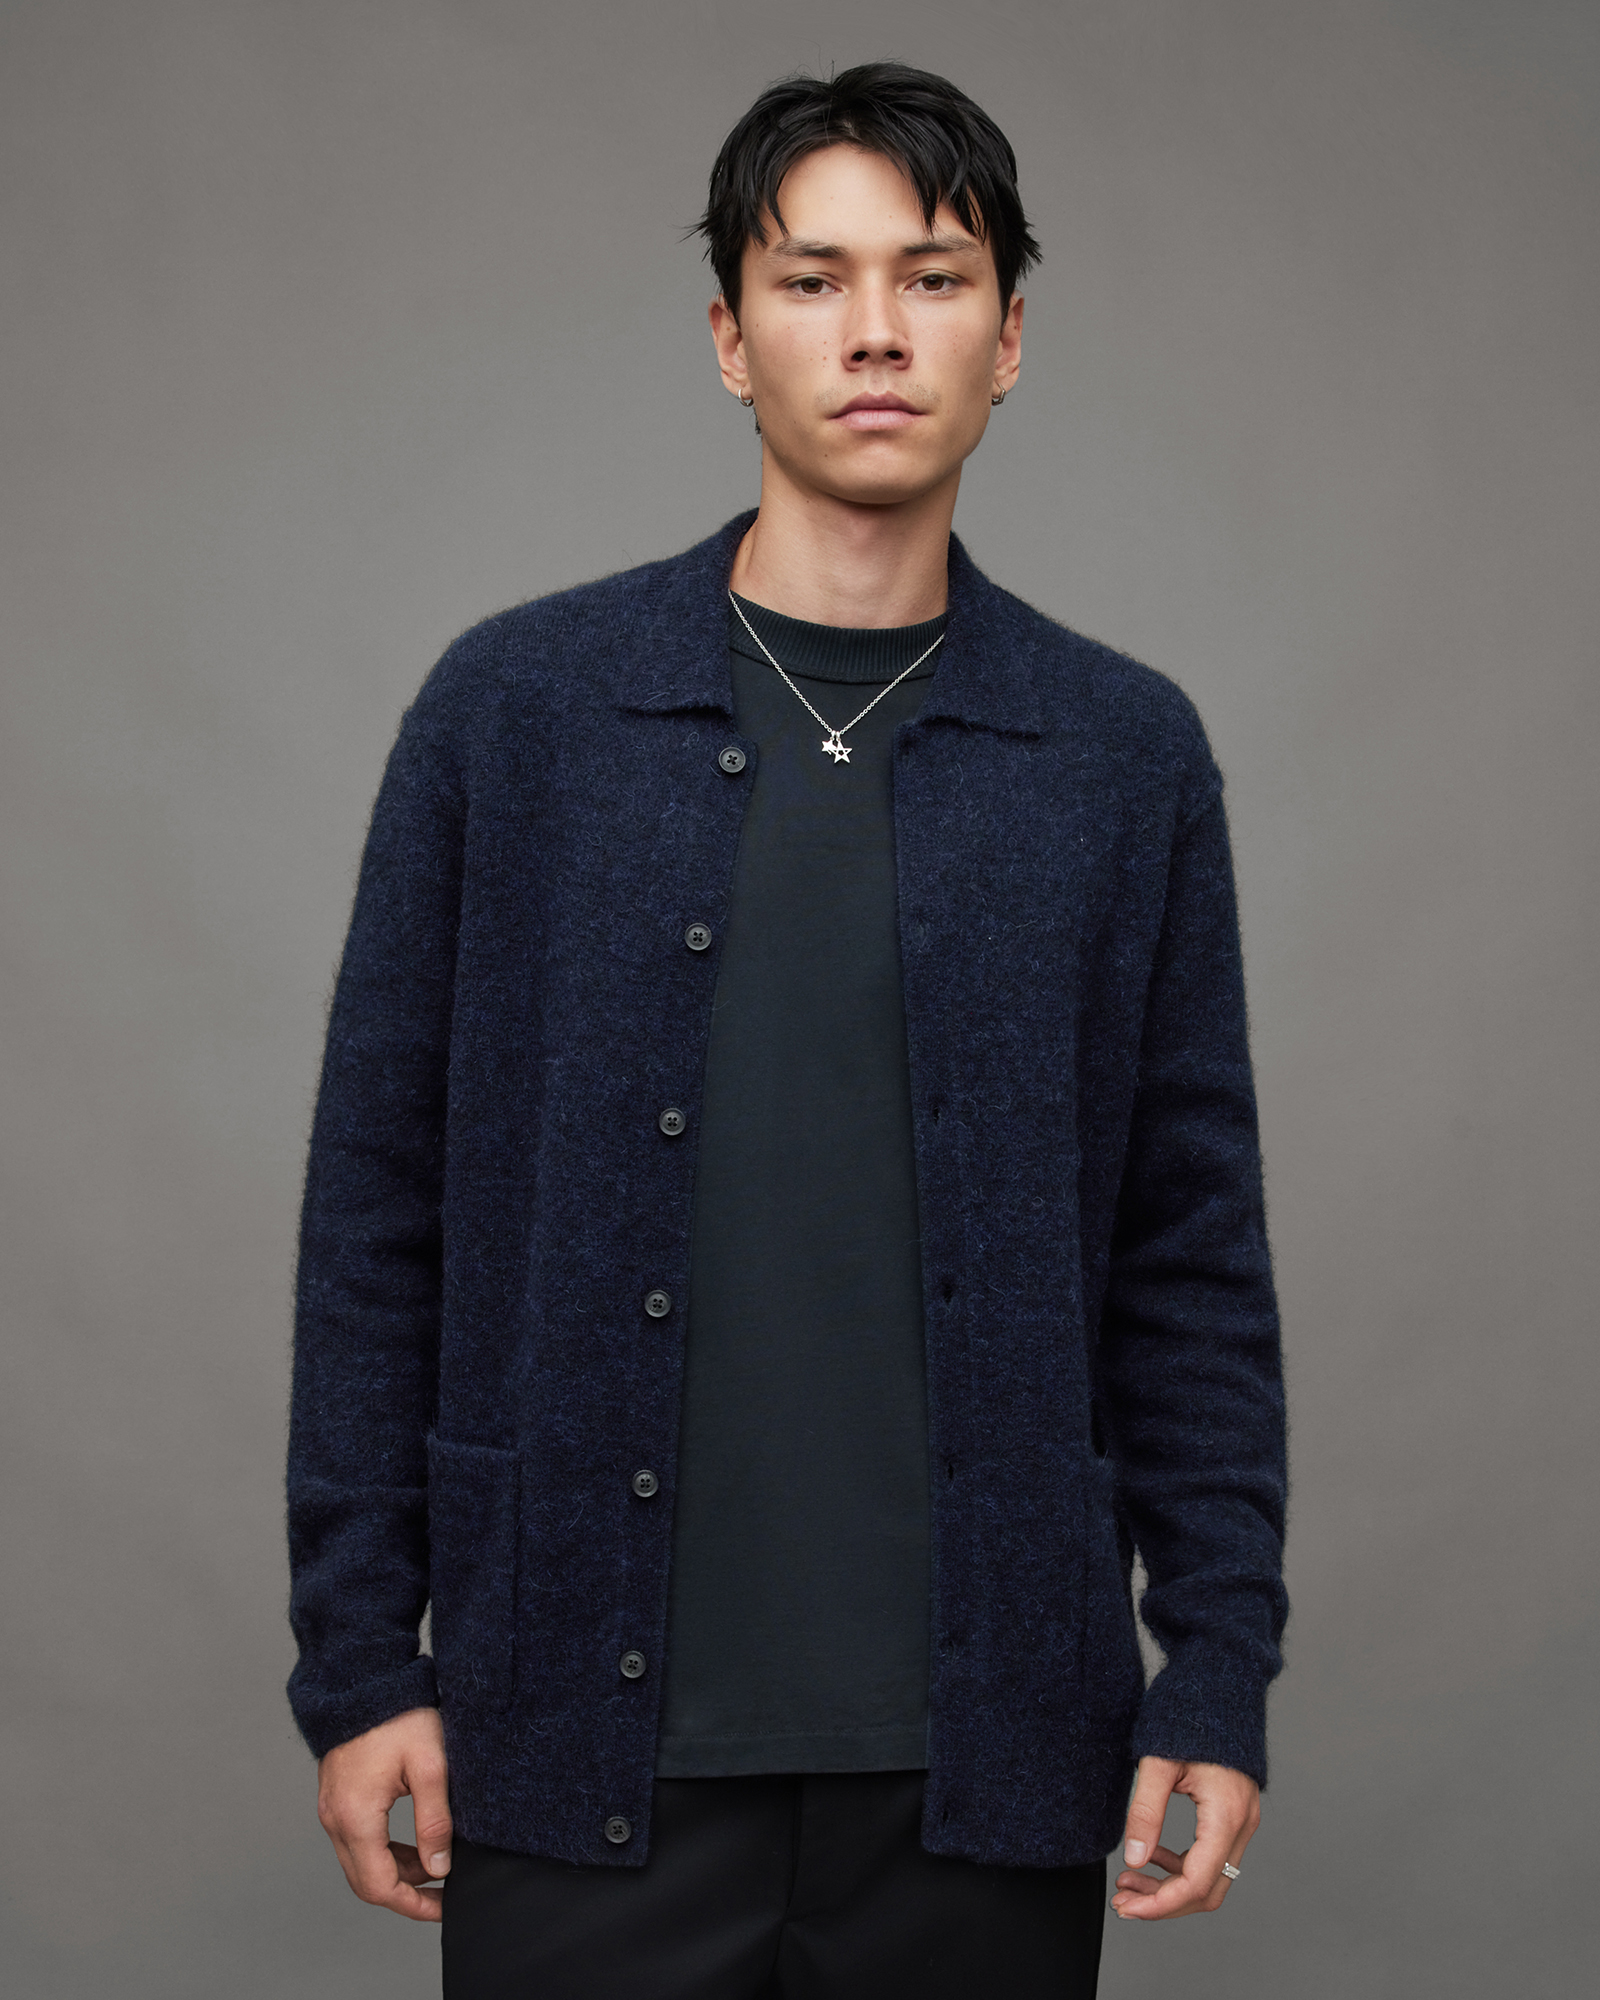 AllSaints Cygnus Polo Neck Relaxed Fit Cardigan,, INK NAVY